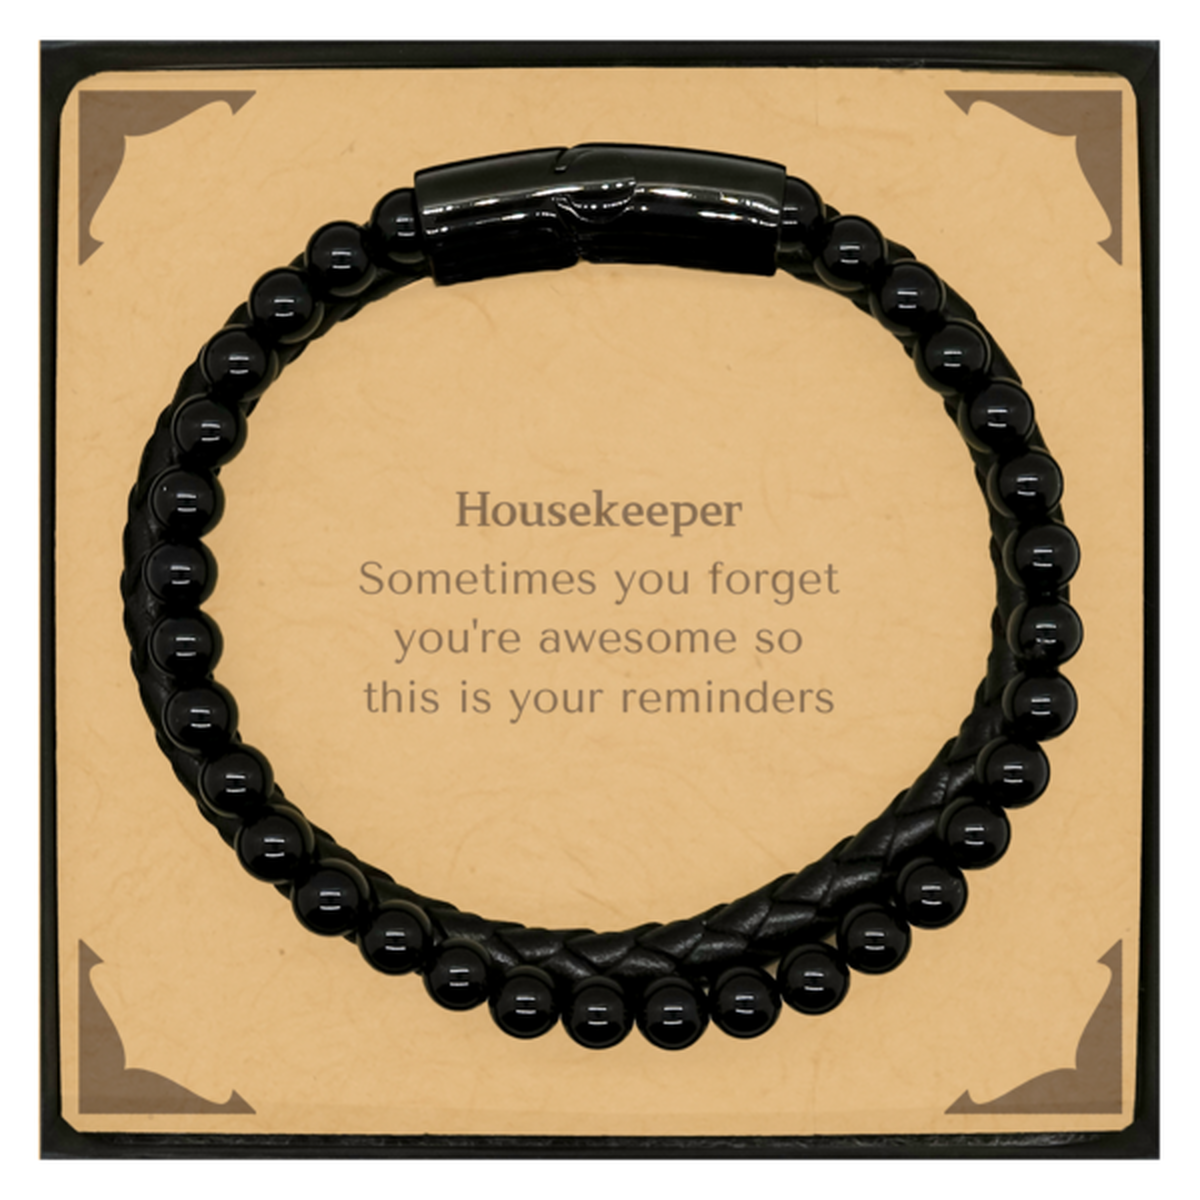 Sentimental Housekeeper Stone Leather Bracelets, Housekeeper Sometimes you forget you're awesome so this is your reminders, Graduation Christmas Birthday Gifts for Housekeeper, Men, Women, Coworkers